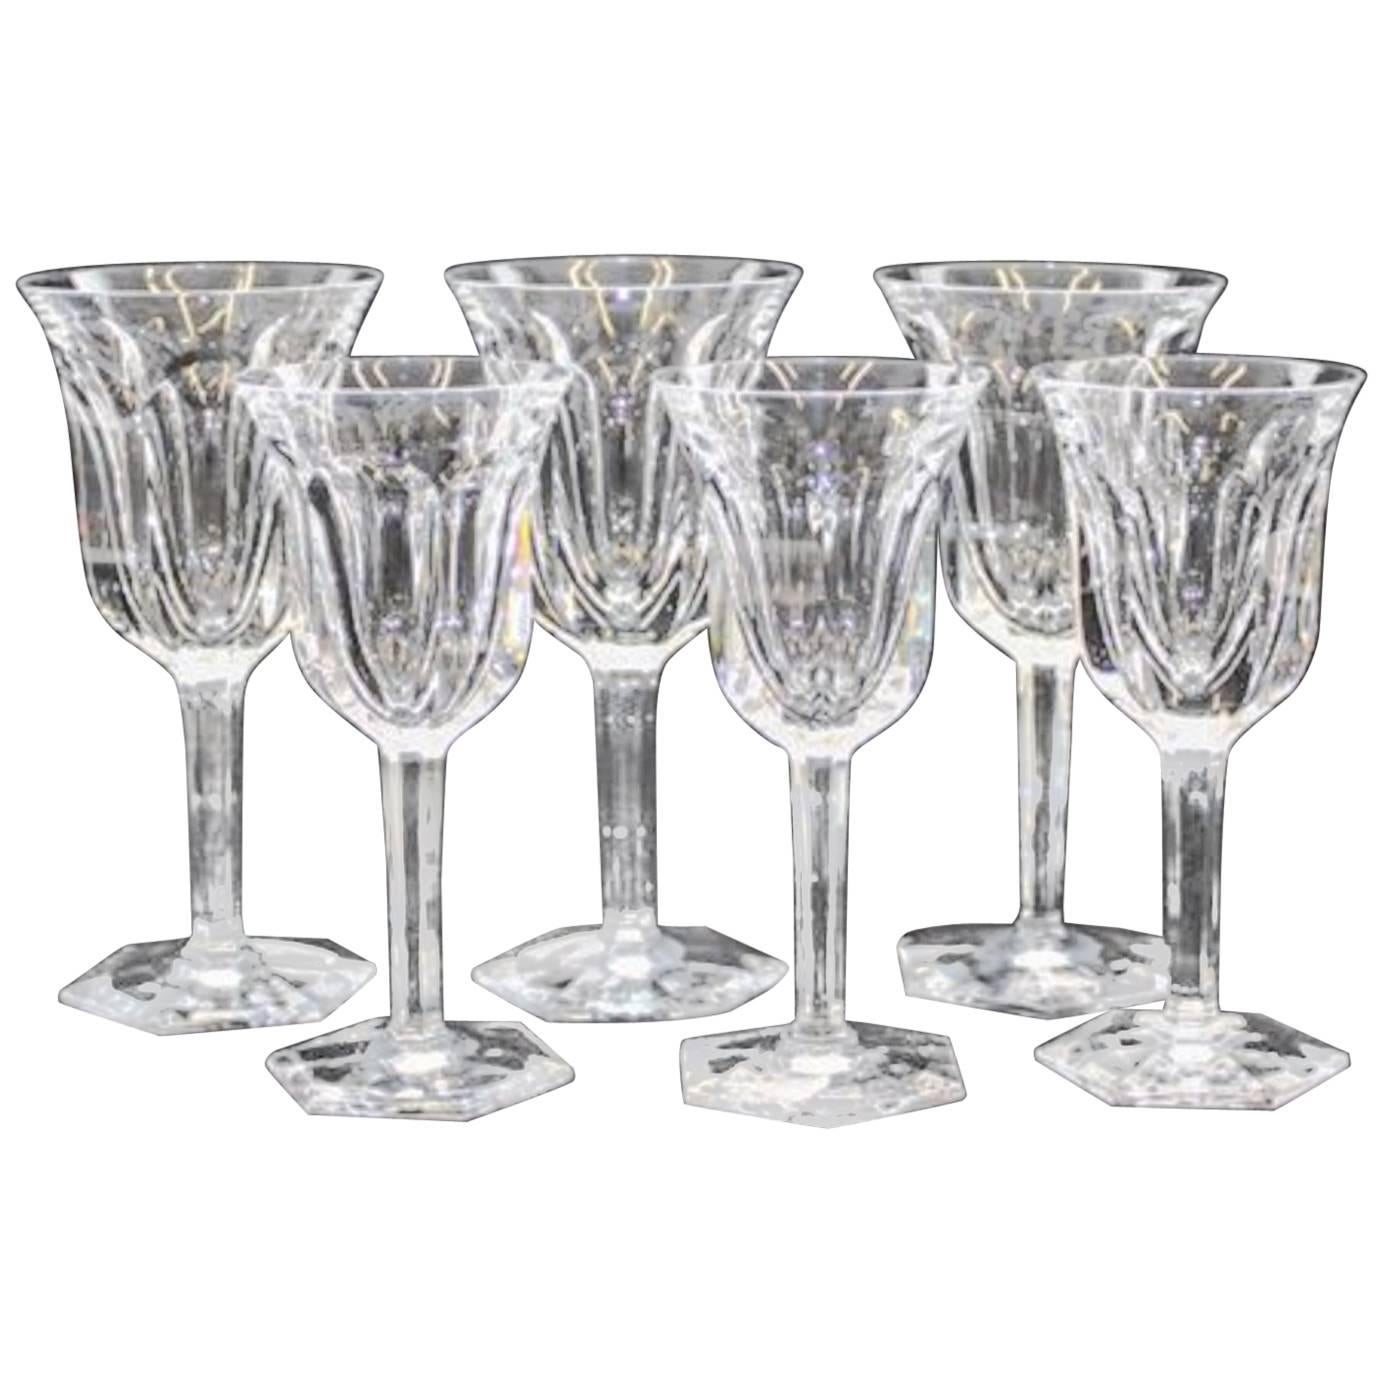 Extensive Collection of Baccarat Cut Crystal Stemware, Red Wines and White Wines